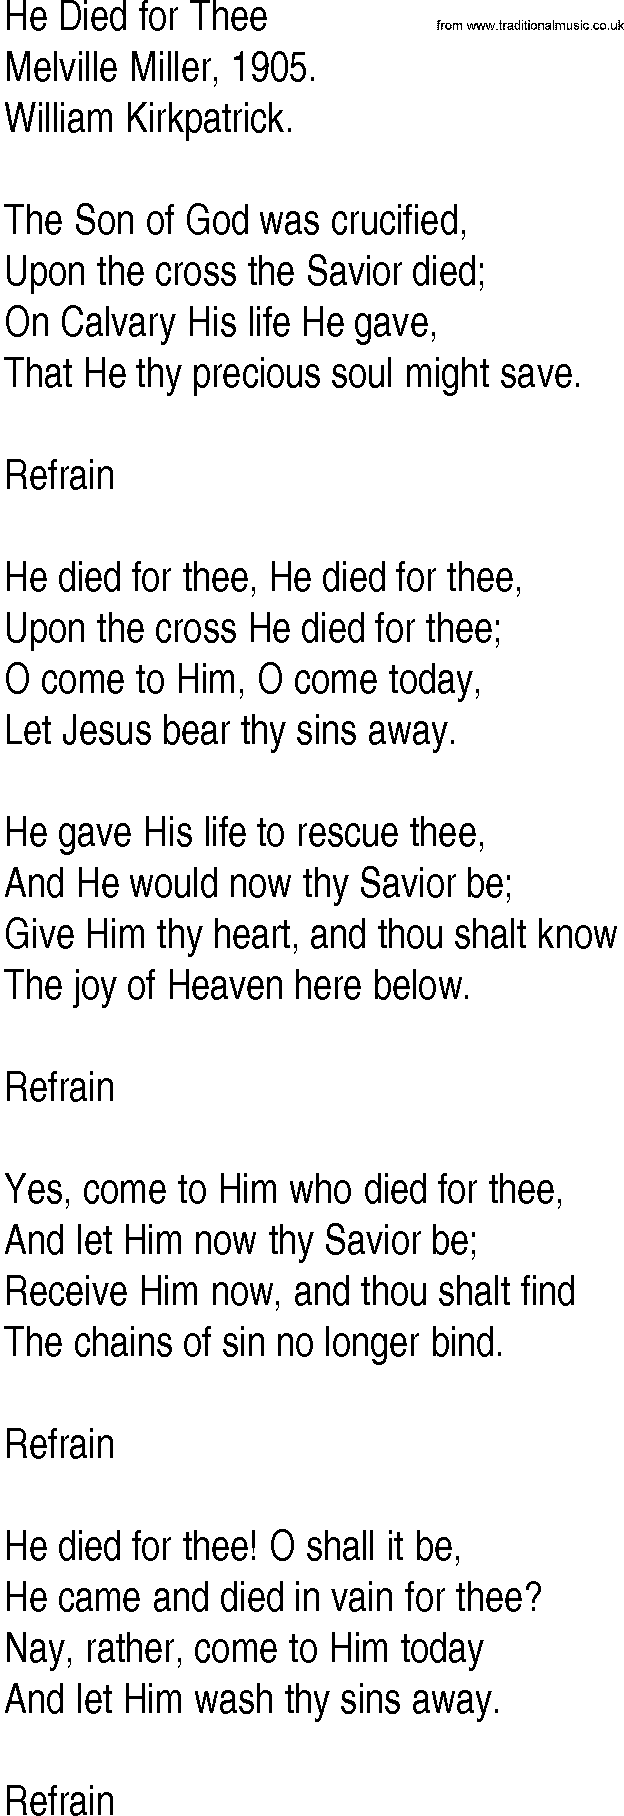 Hymn and Gospel Song: He Died for Thee by Melville Miller lyrics